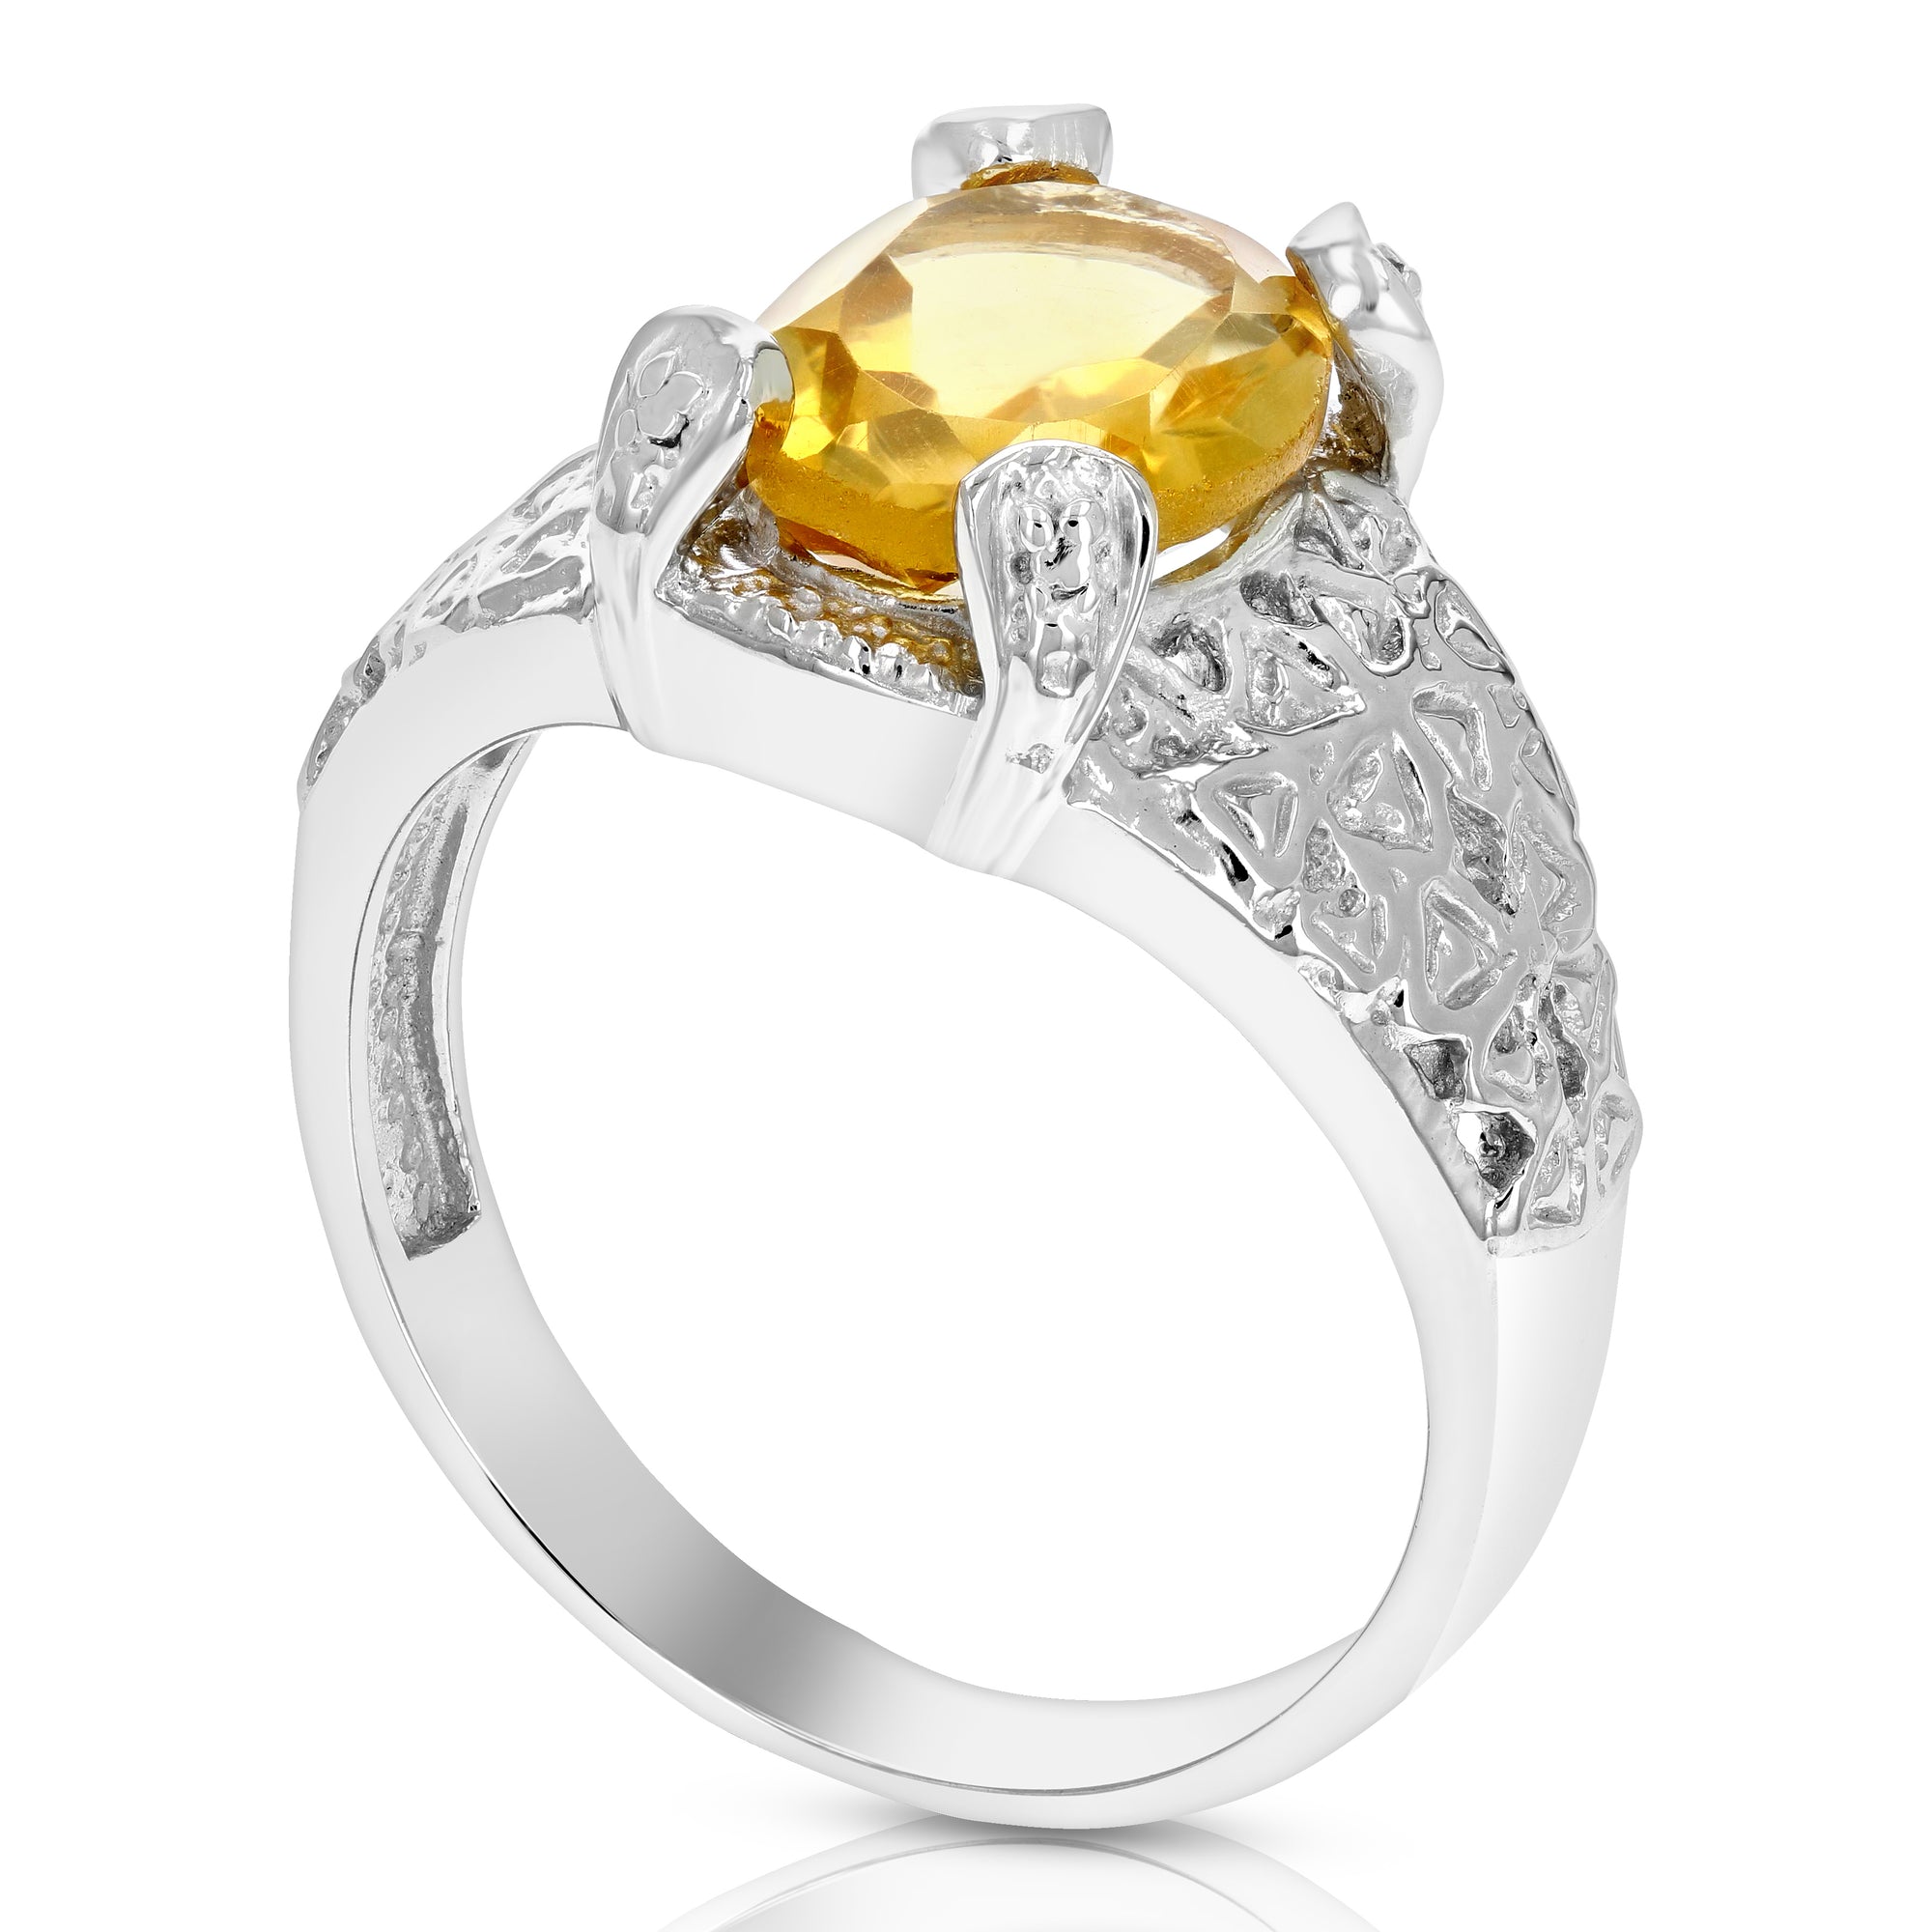 2 cttw Oval Shape Citrine Ring in .925 Sterling Silver with Filigree Design